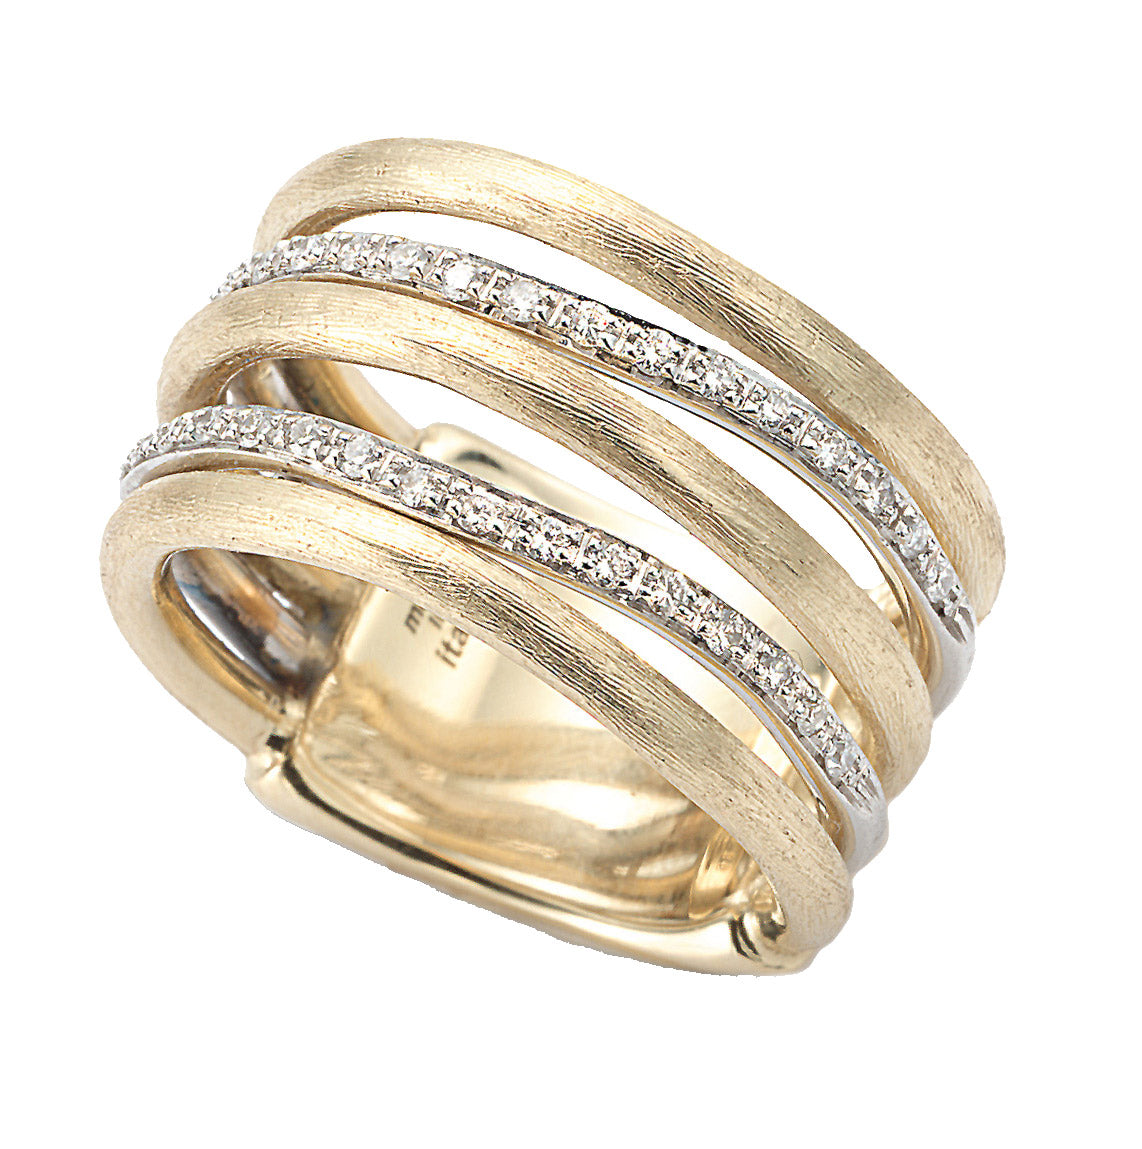 MARCO BICEGO 18K YELLOW AND WHITE GOLD 0.26CT VS/G WIDE DIAMOND RING FROM THE JAIPUR COLLECTION